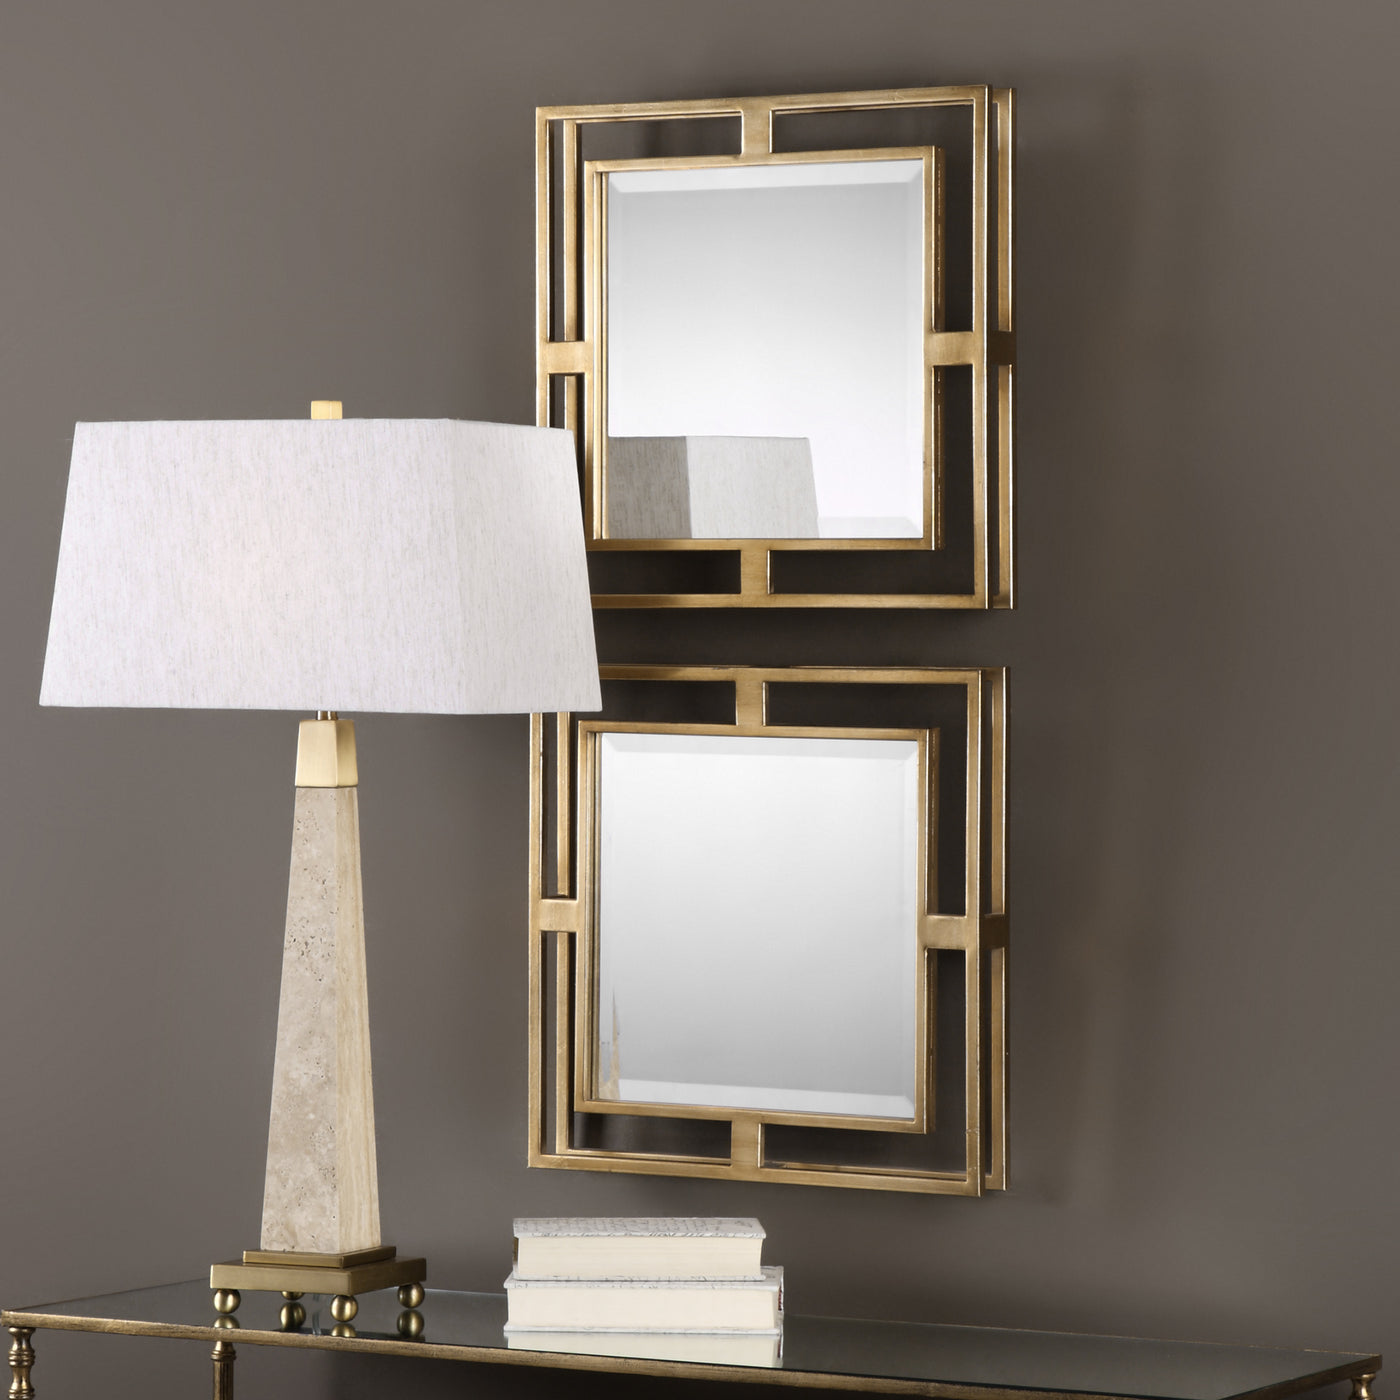 Forged Iron Featuring 3-dimensional Depth, Hand Finished In A Lightly Antiqued Gold Leaf. Mirrors Are Beveled.